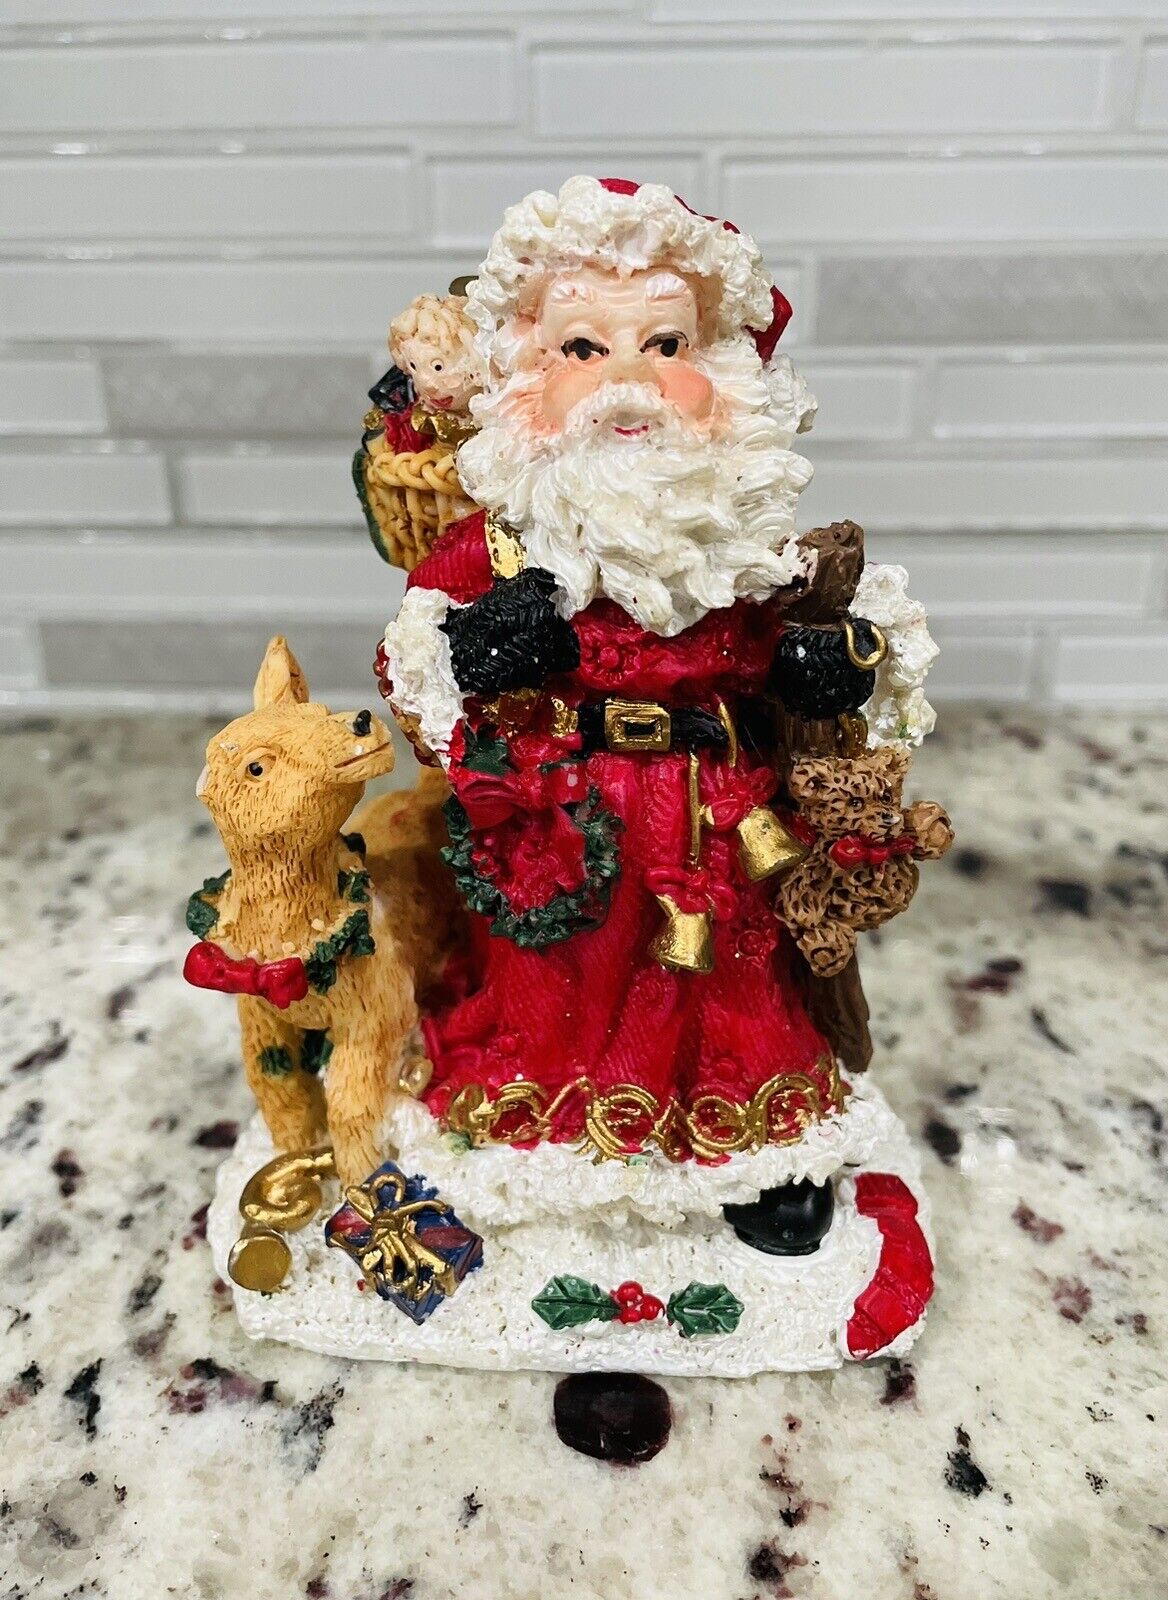 Santa Clause Holiday Statue With Reindeer